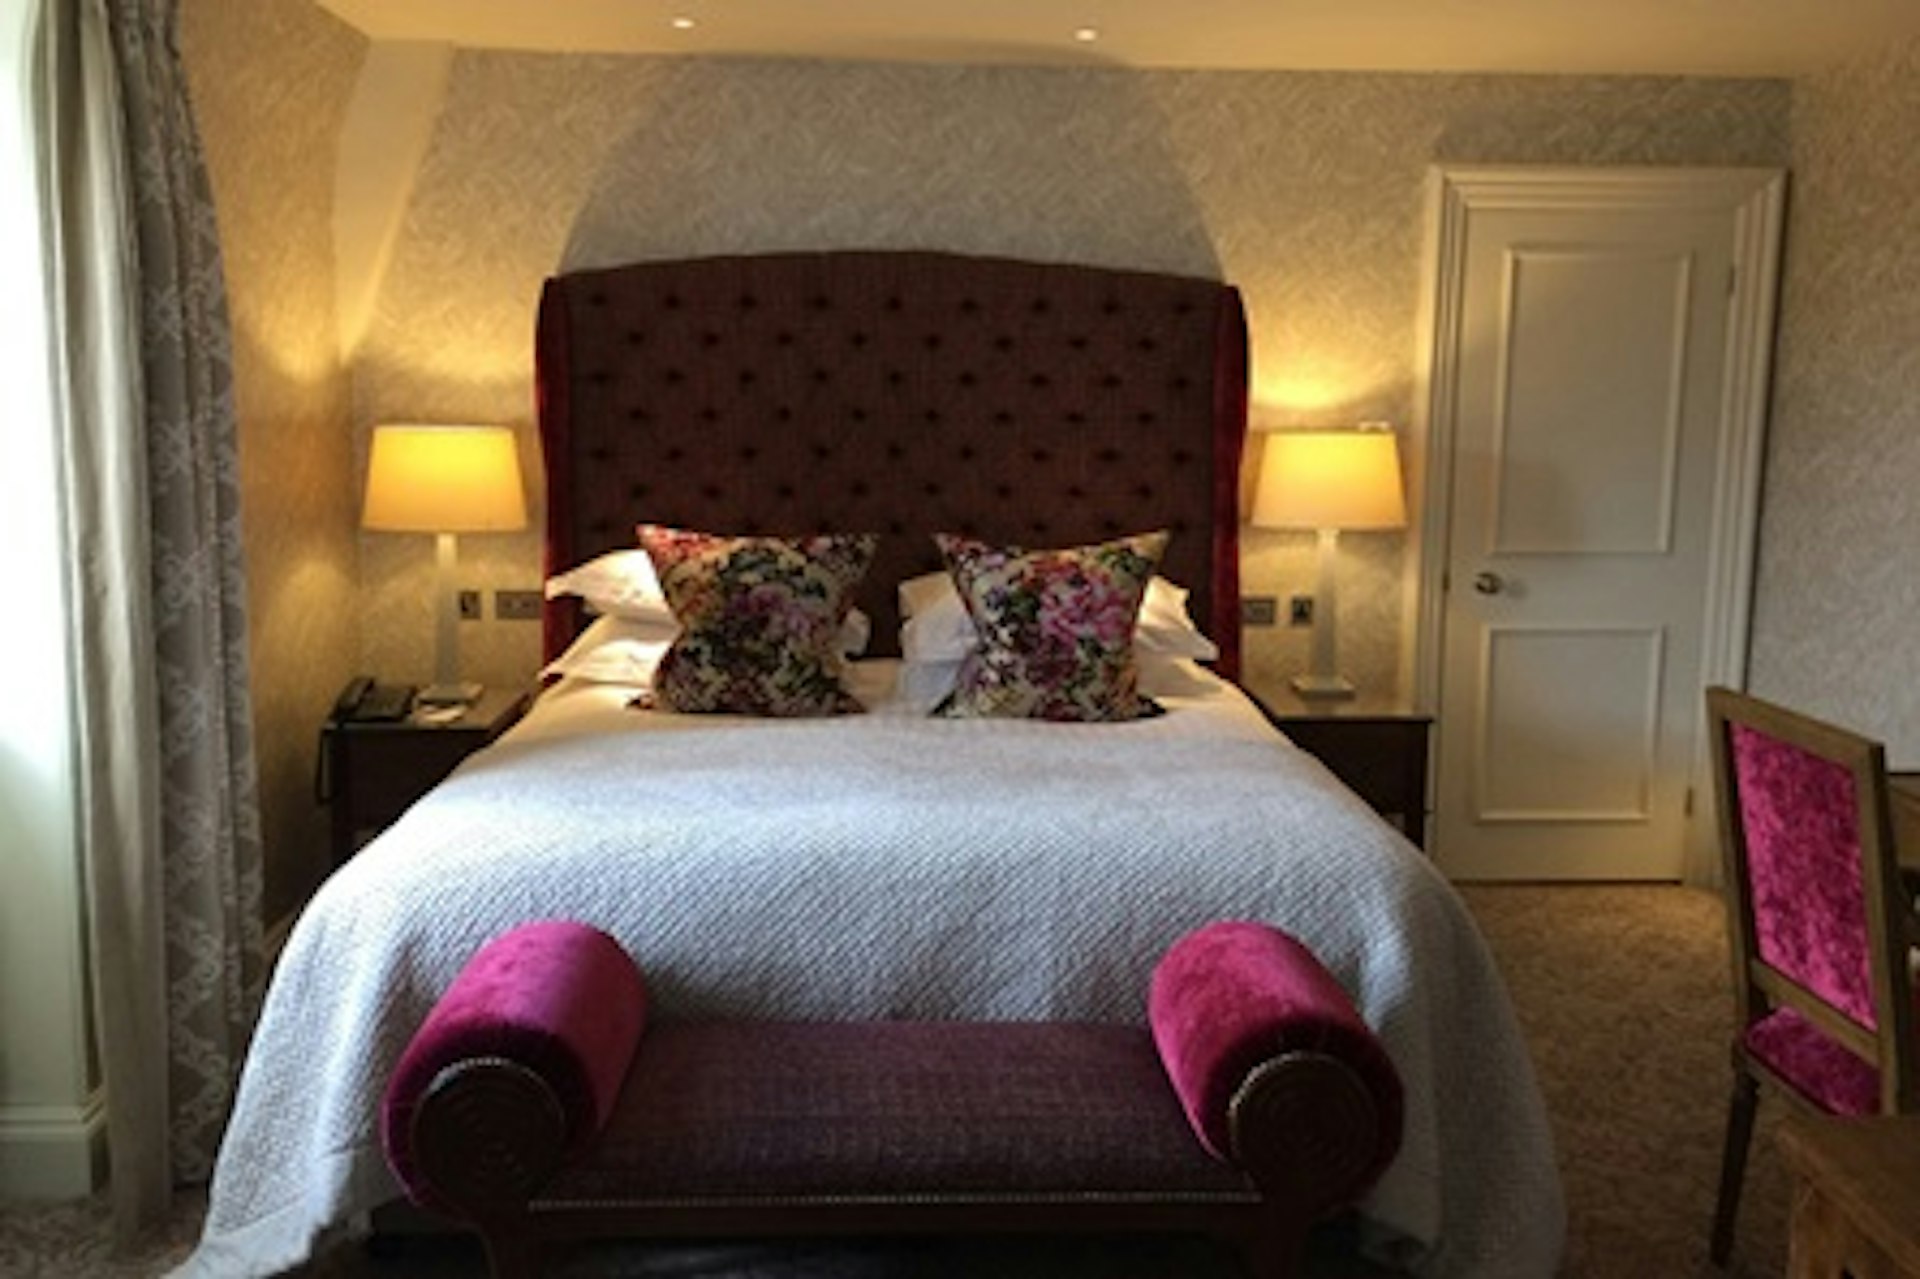 One Night Dartmoor National Park Luxury Getaway for Two at the 5* Bovey Castle Hotel